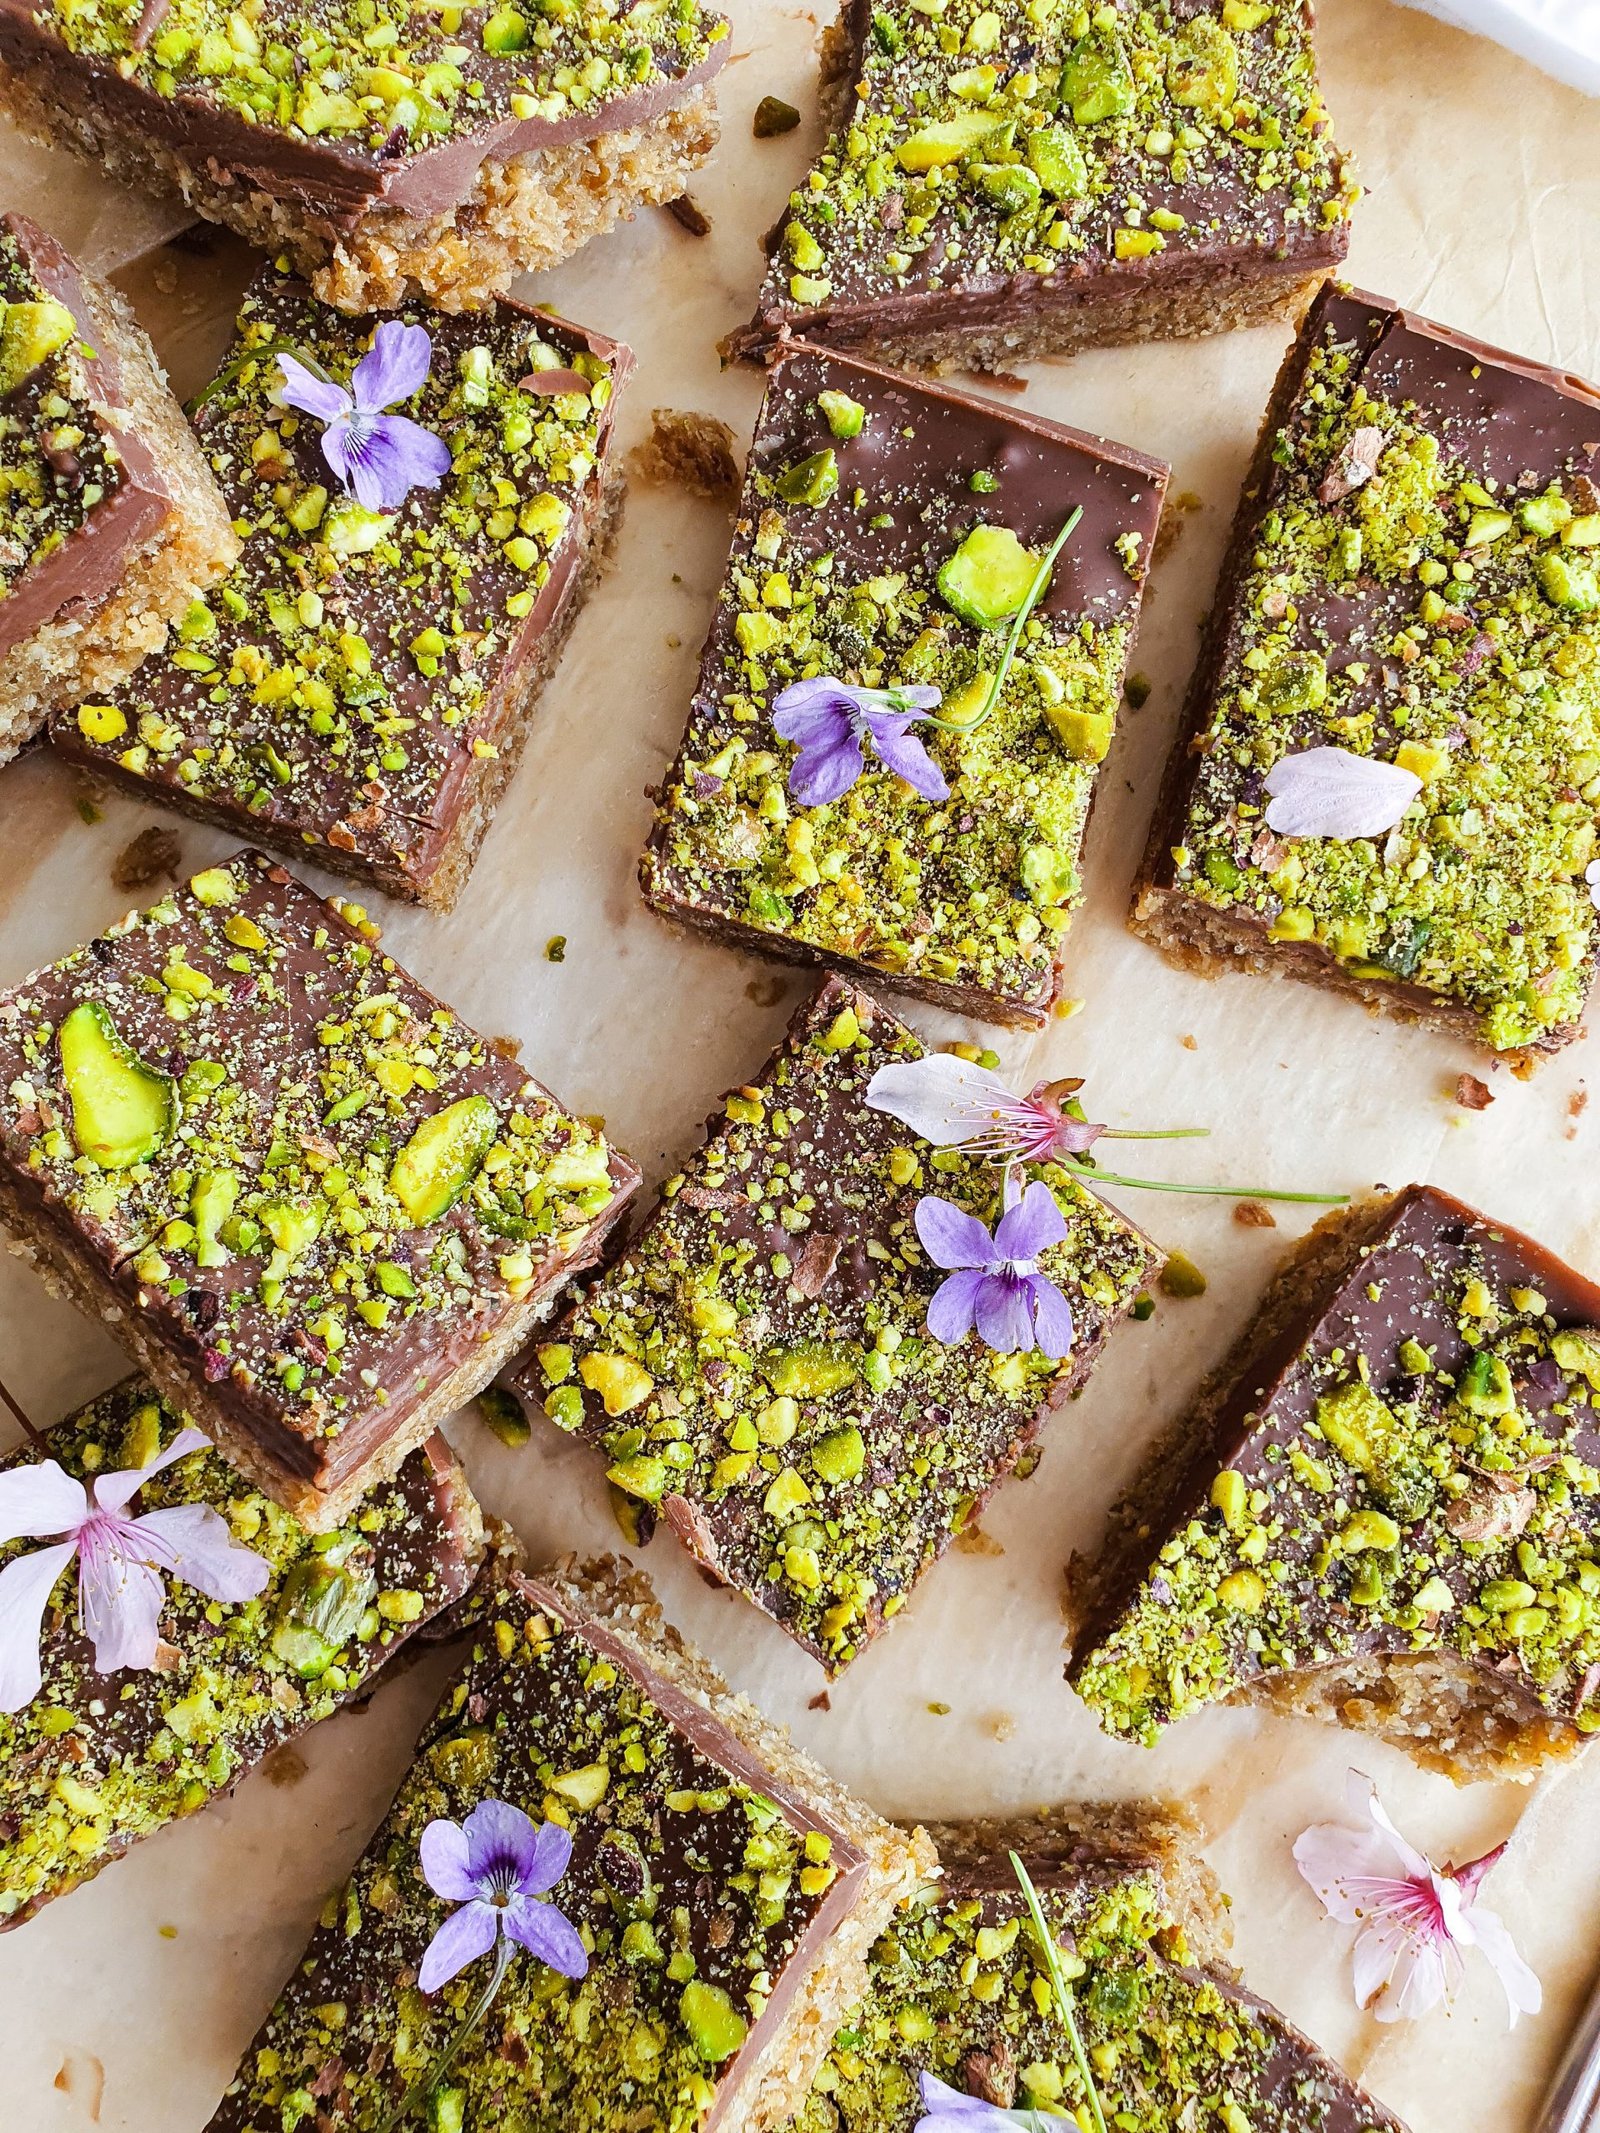 Enjoy the perfect balance of flavors in every bite of these 4 ingredient Tahini Pistachio Date Bars. A healthy and delicious snack made with simple ingredients.